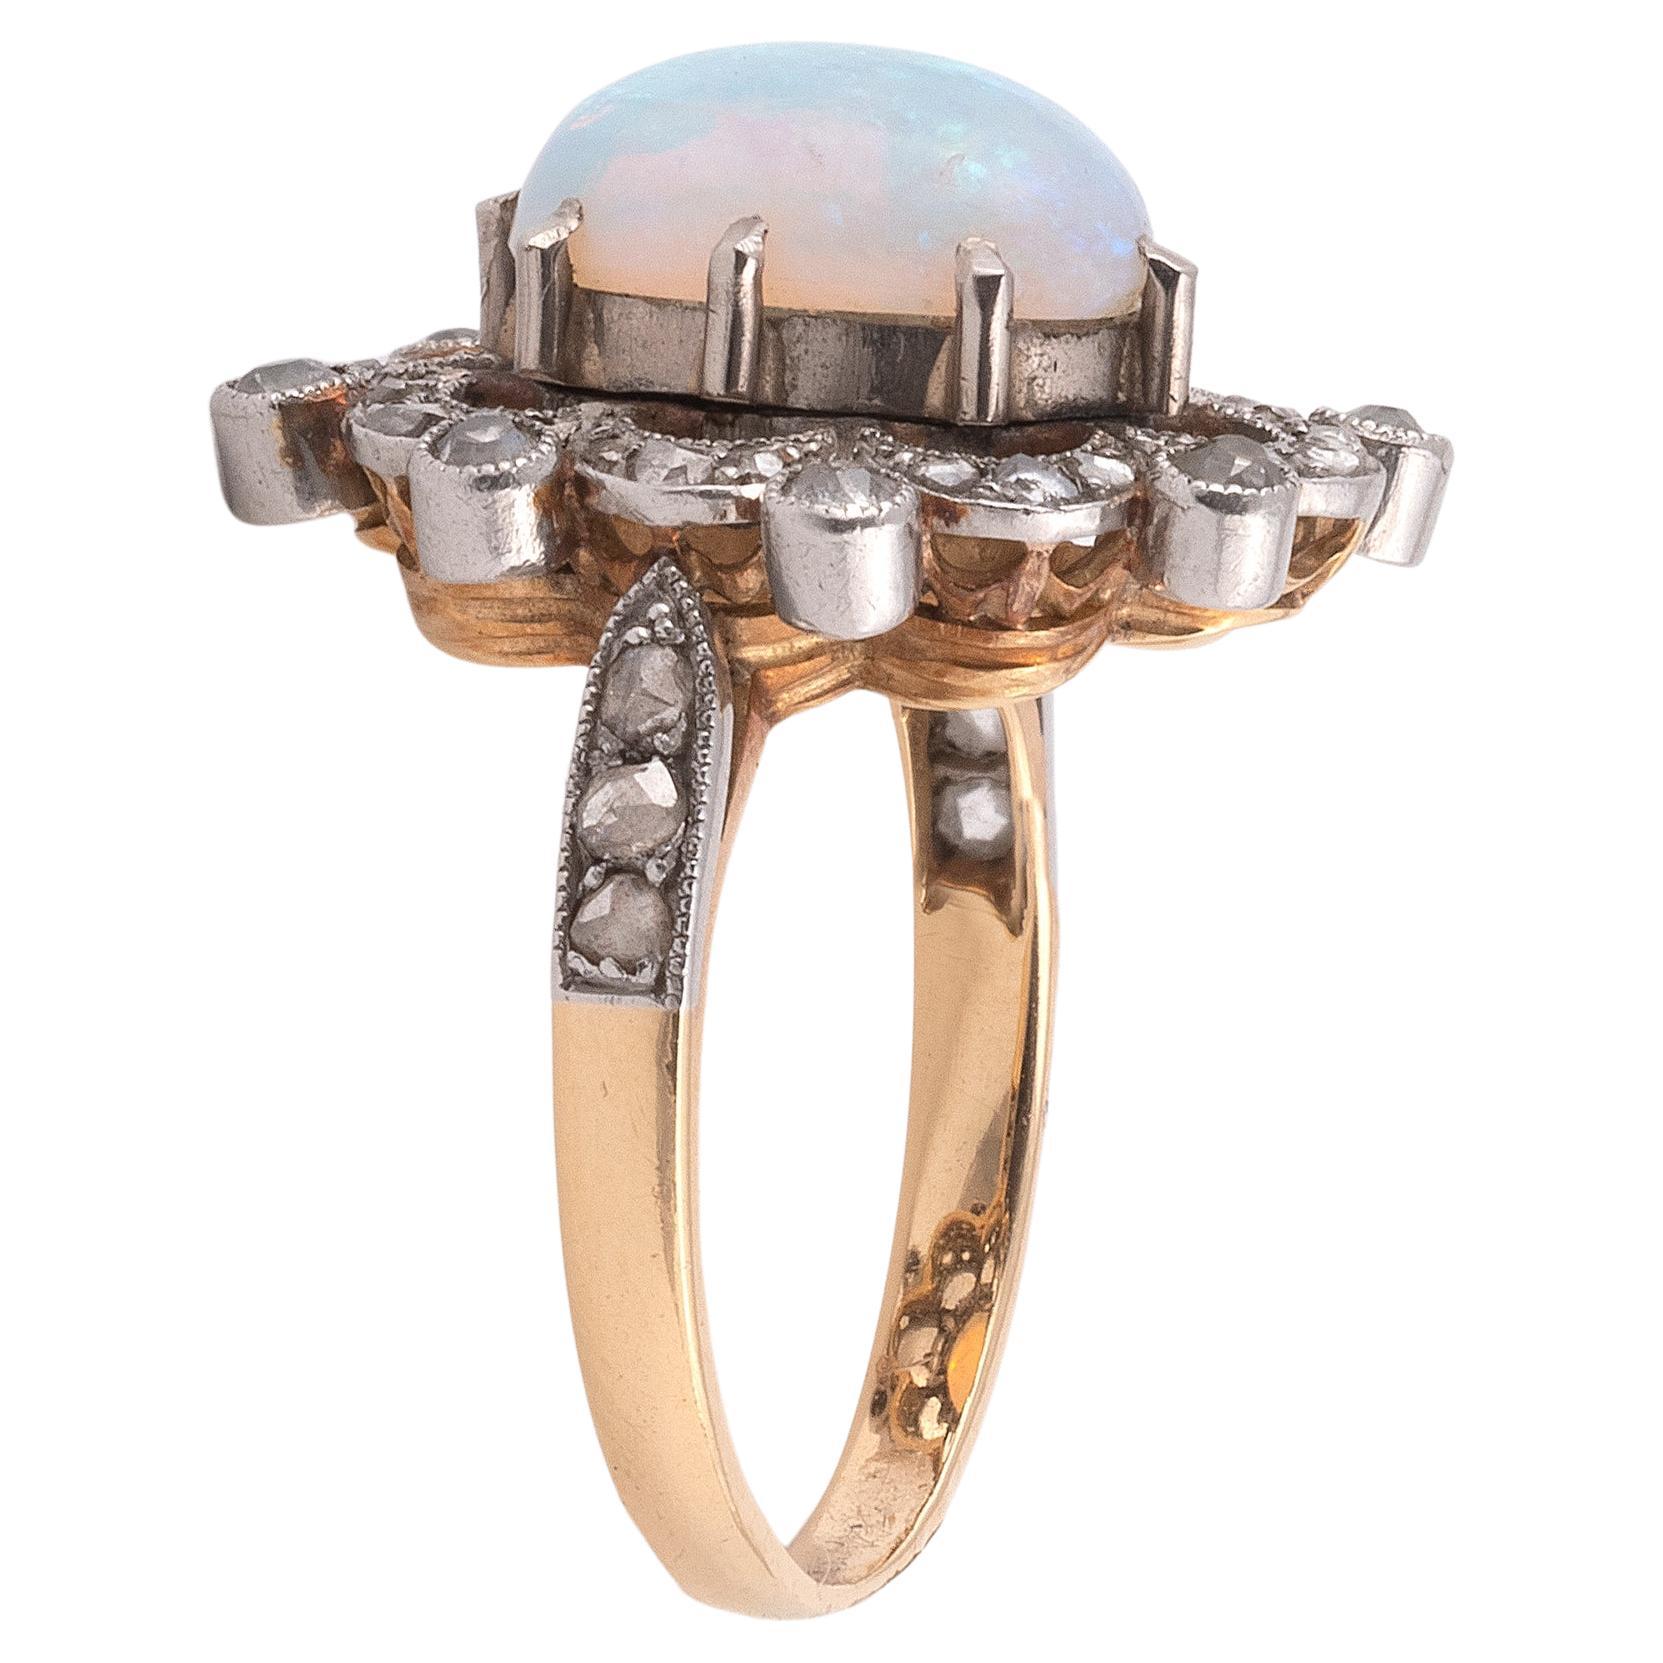 The oval opal single stone with cluster diamond stone, to a plain shank.
Size : 6
Weight : 4,6gr.
